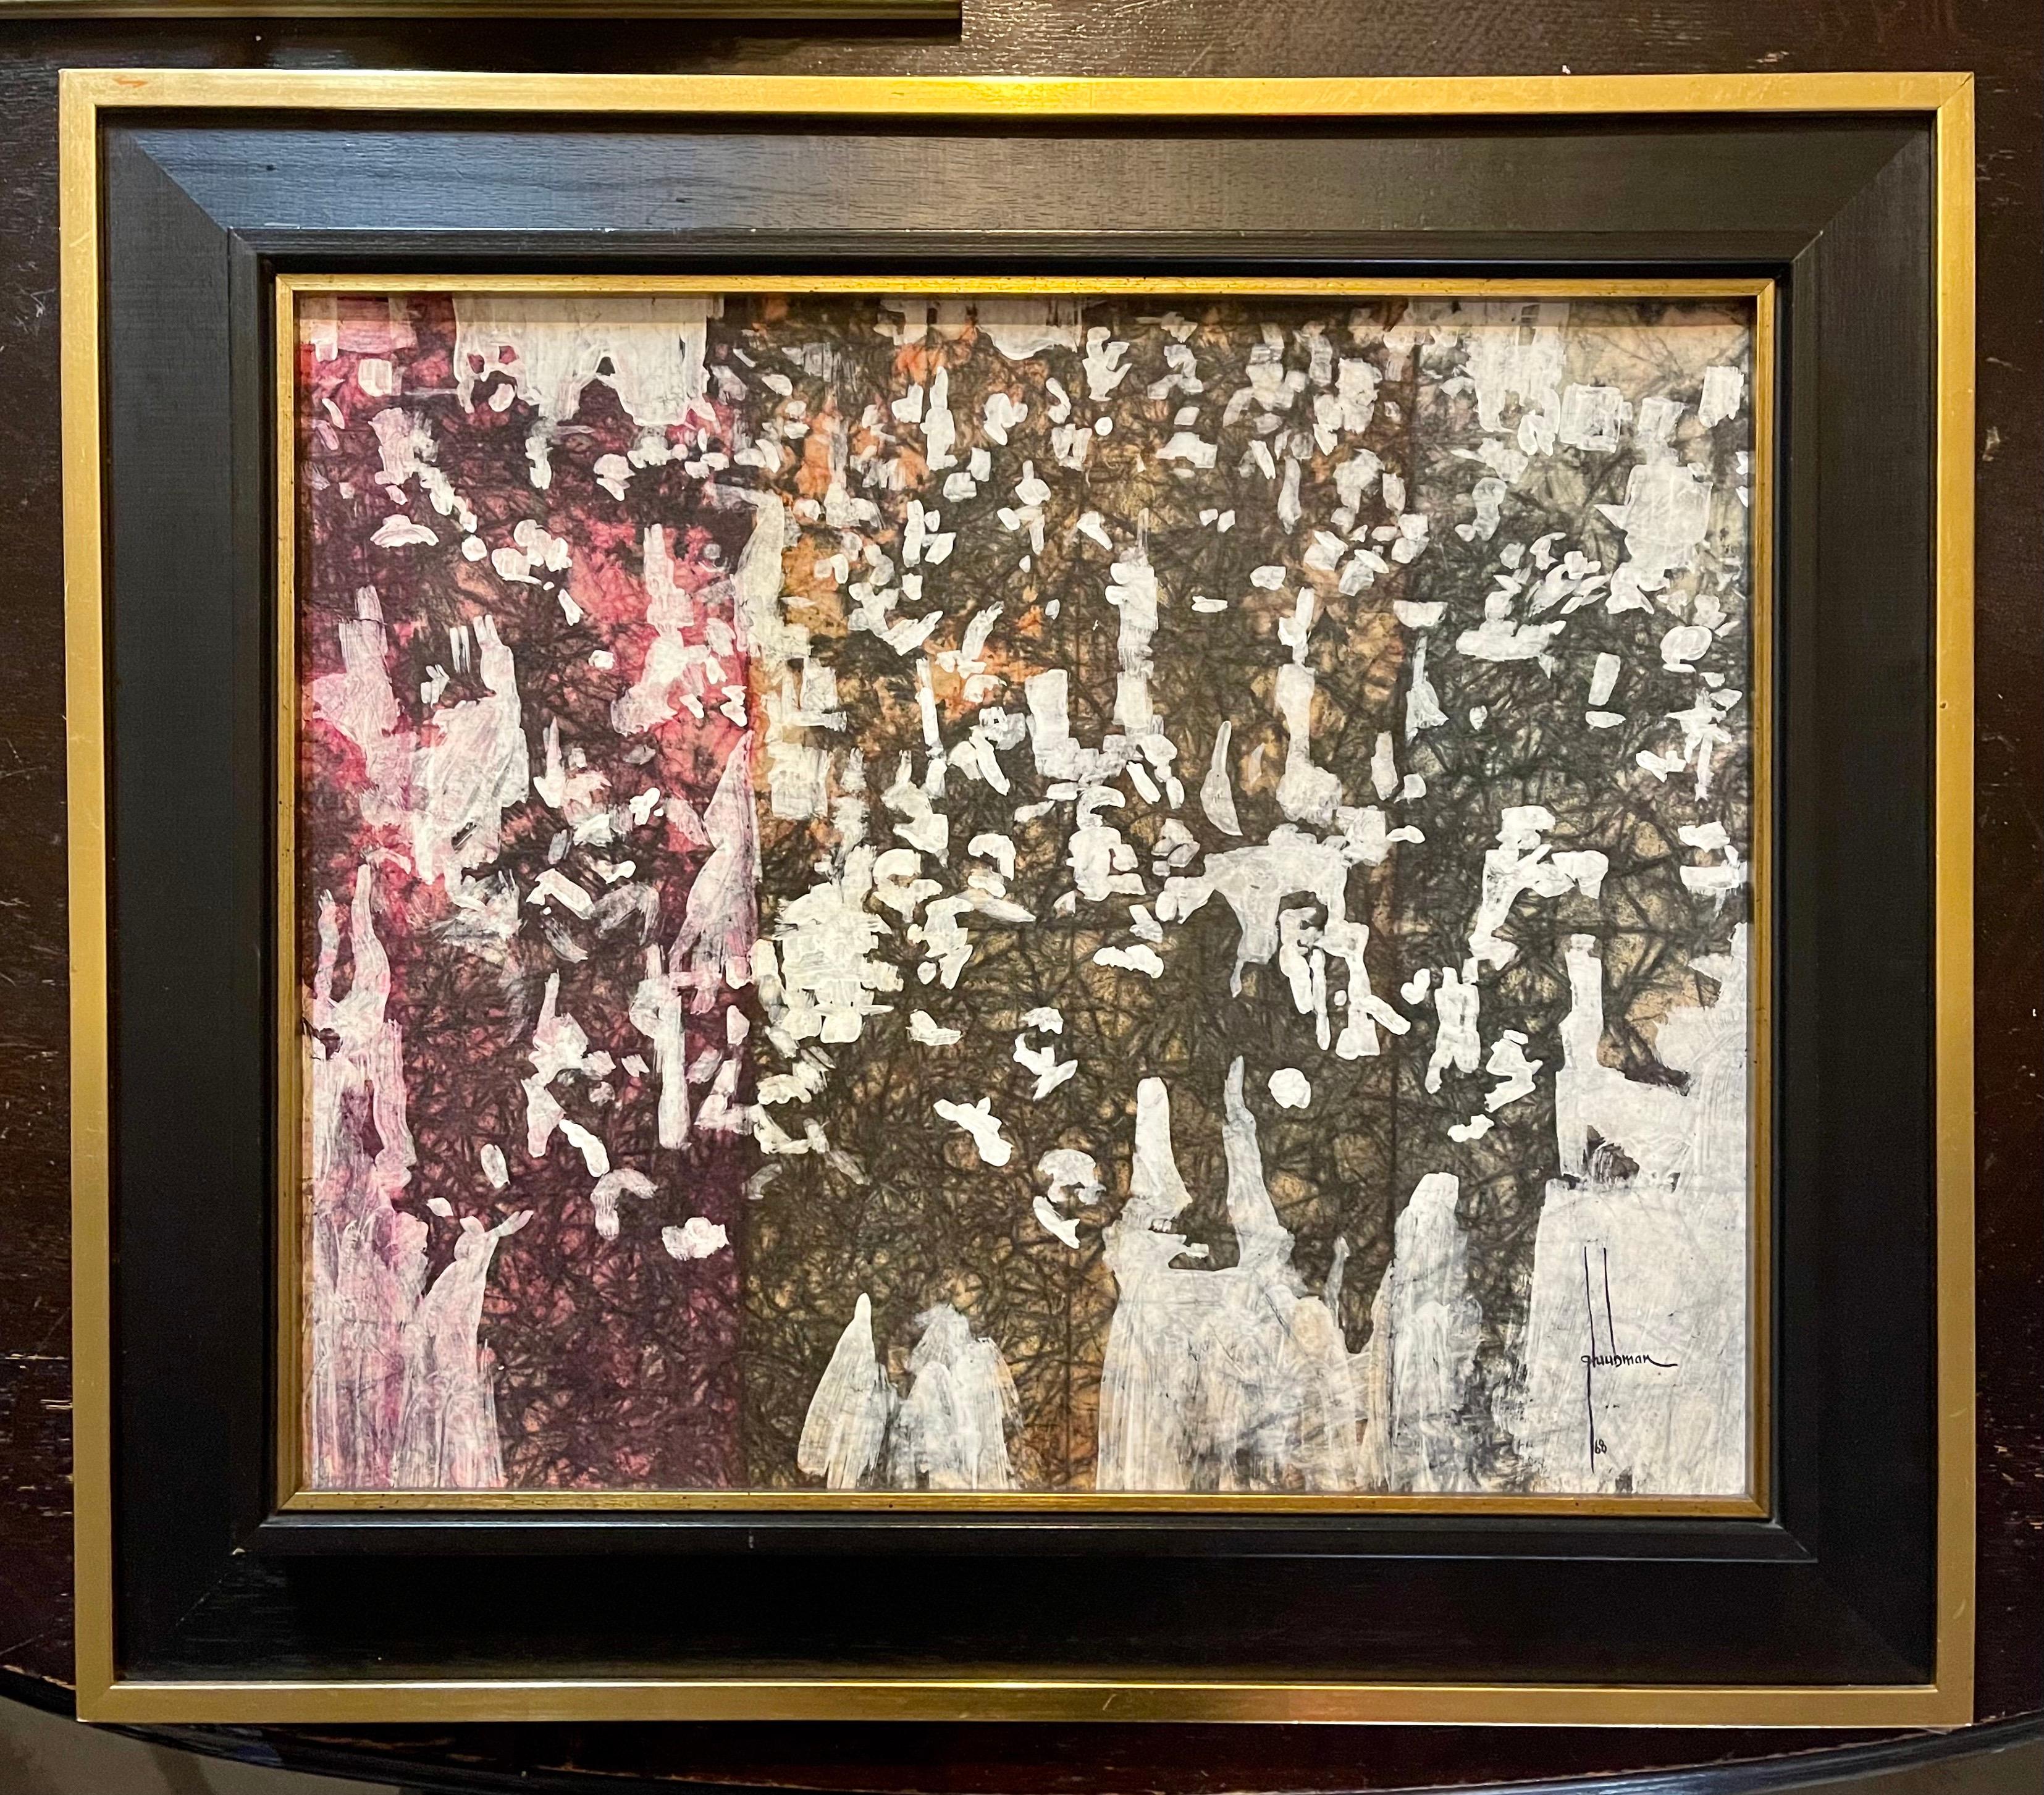 26 X 30 framed 18 X 21 sight size.
mod piece with a crowd of figures with pink, magenta and gold tinges to it. 
This appears to be an oil painting. she is known for her acrylic painting so this might be acrylic.

Edna Glaubman (1919-1986)